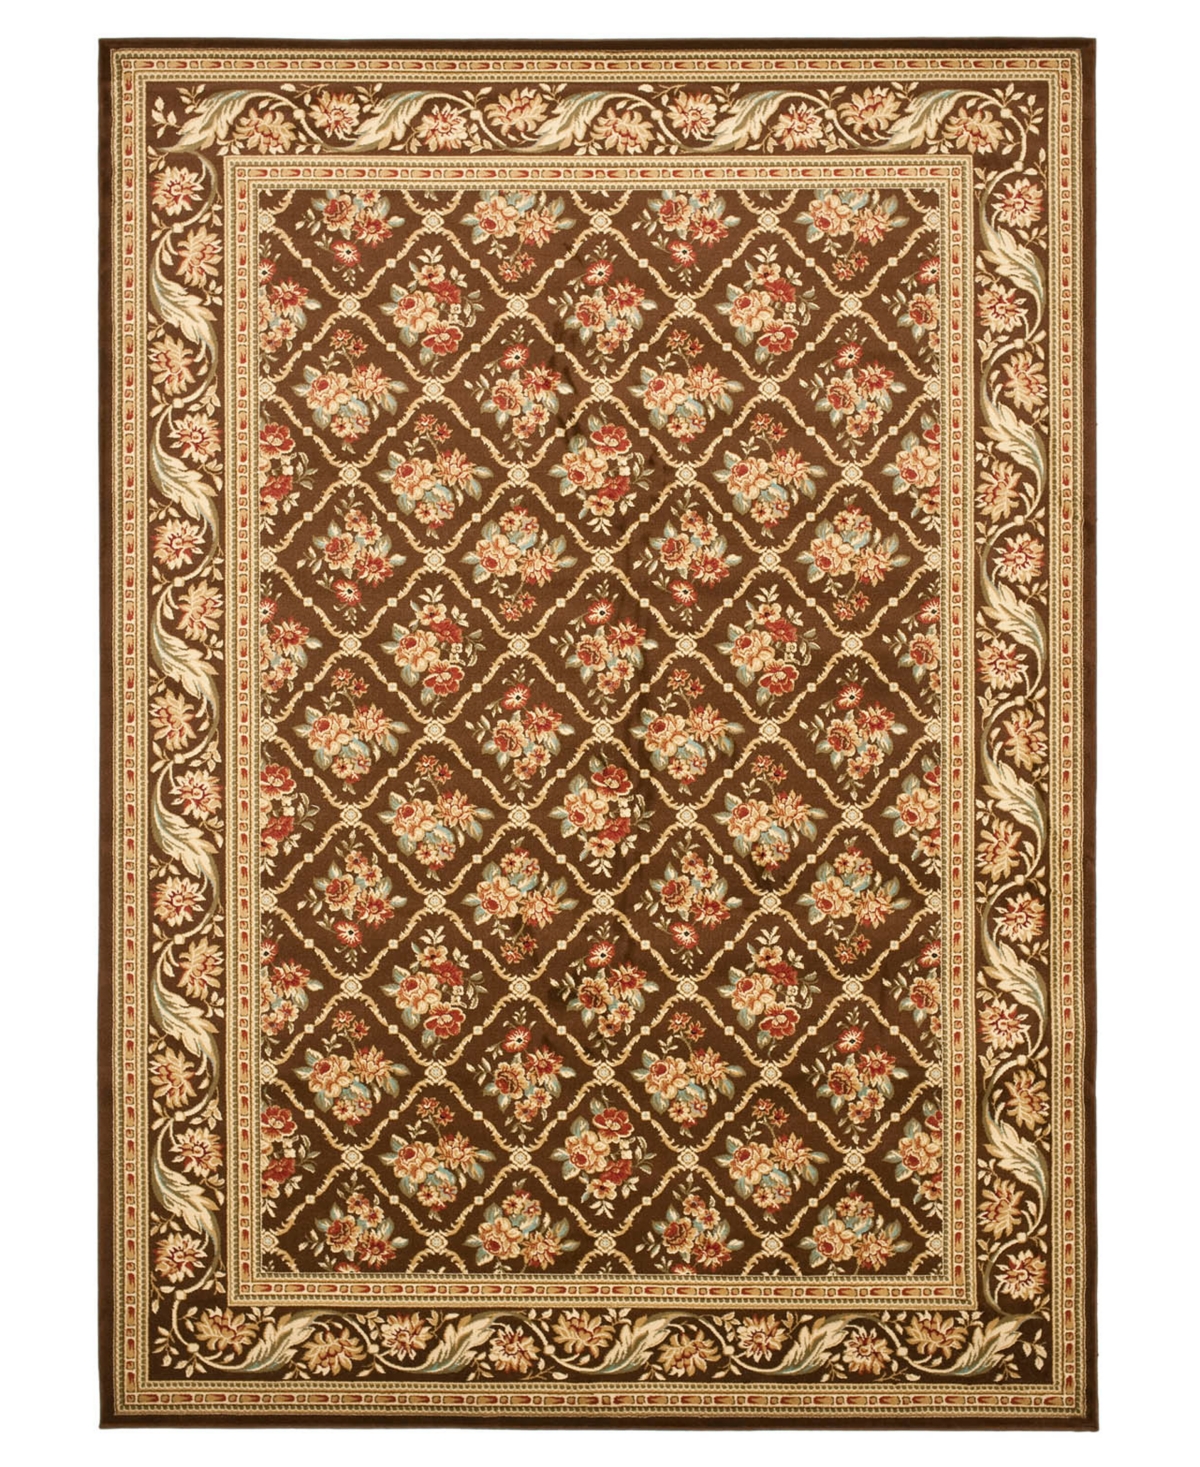 Closeout! Safavieh Area Rug, Lyndhurst LNH556-2525 Brown/Brown 2'3in x 8' Runner Rug at RugsBySize.com